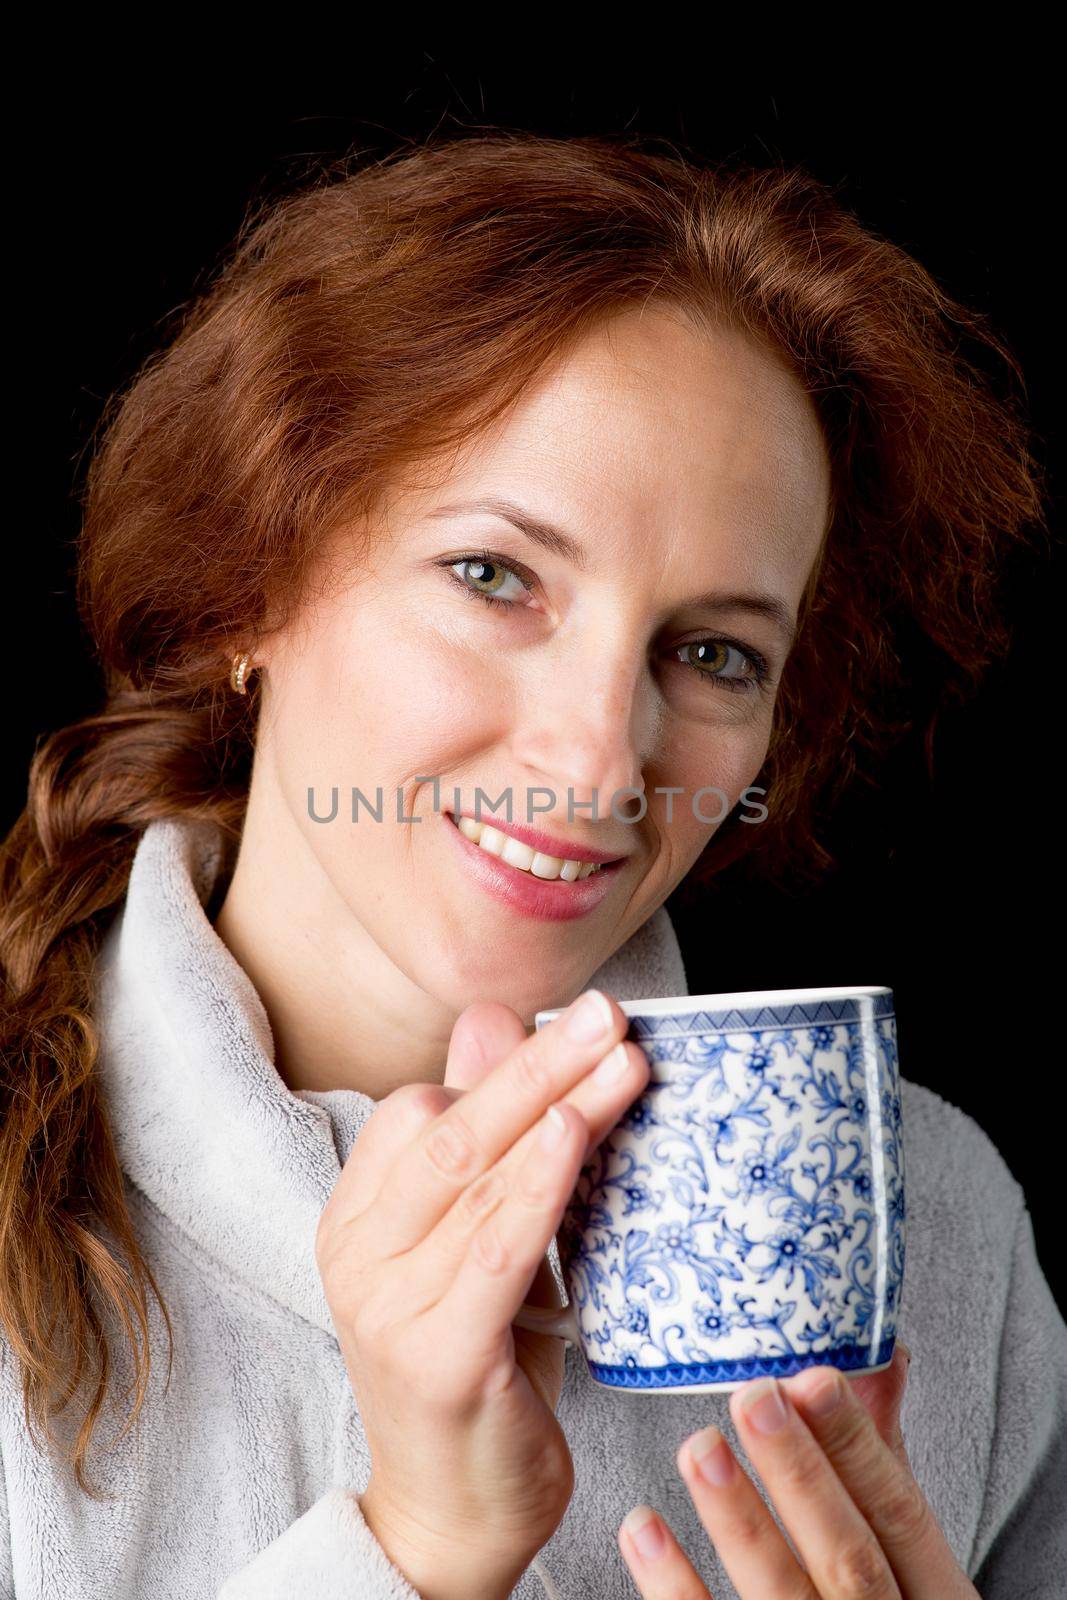 Woman holding mug in her hands. Cheerful brown haired woman in warm sweatshirt posing with cup of coffee or tea against black background. Female person enjoying of hot drink in the morning